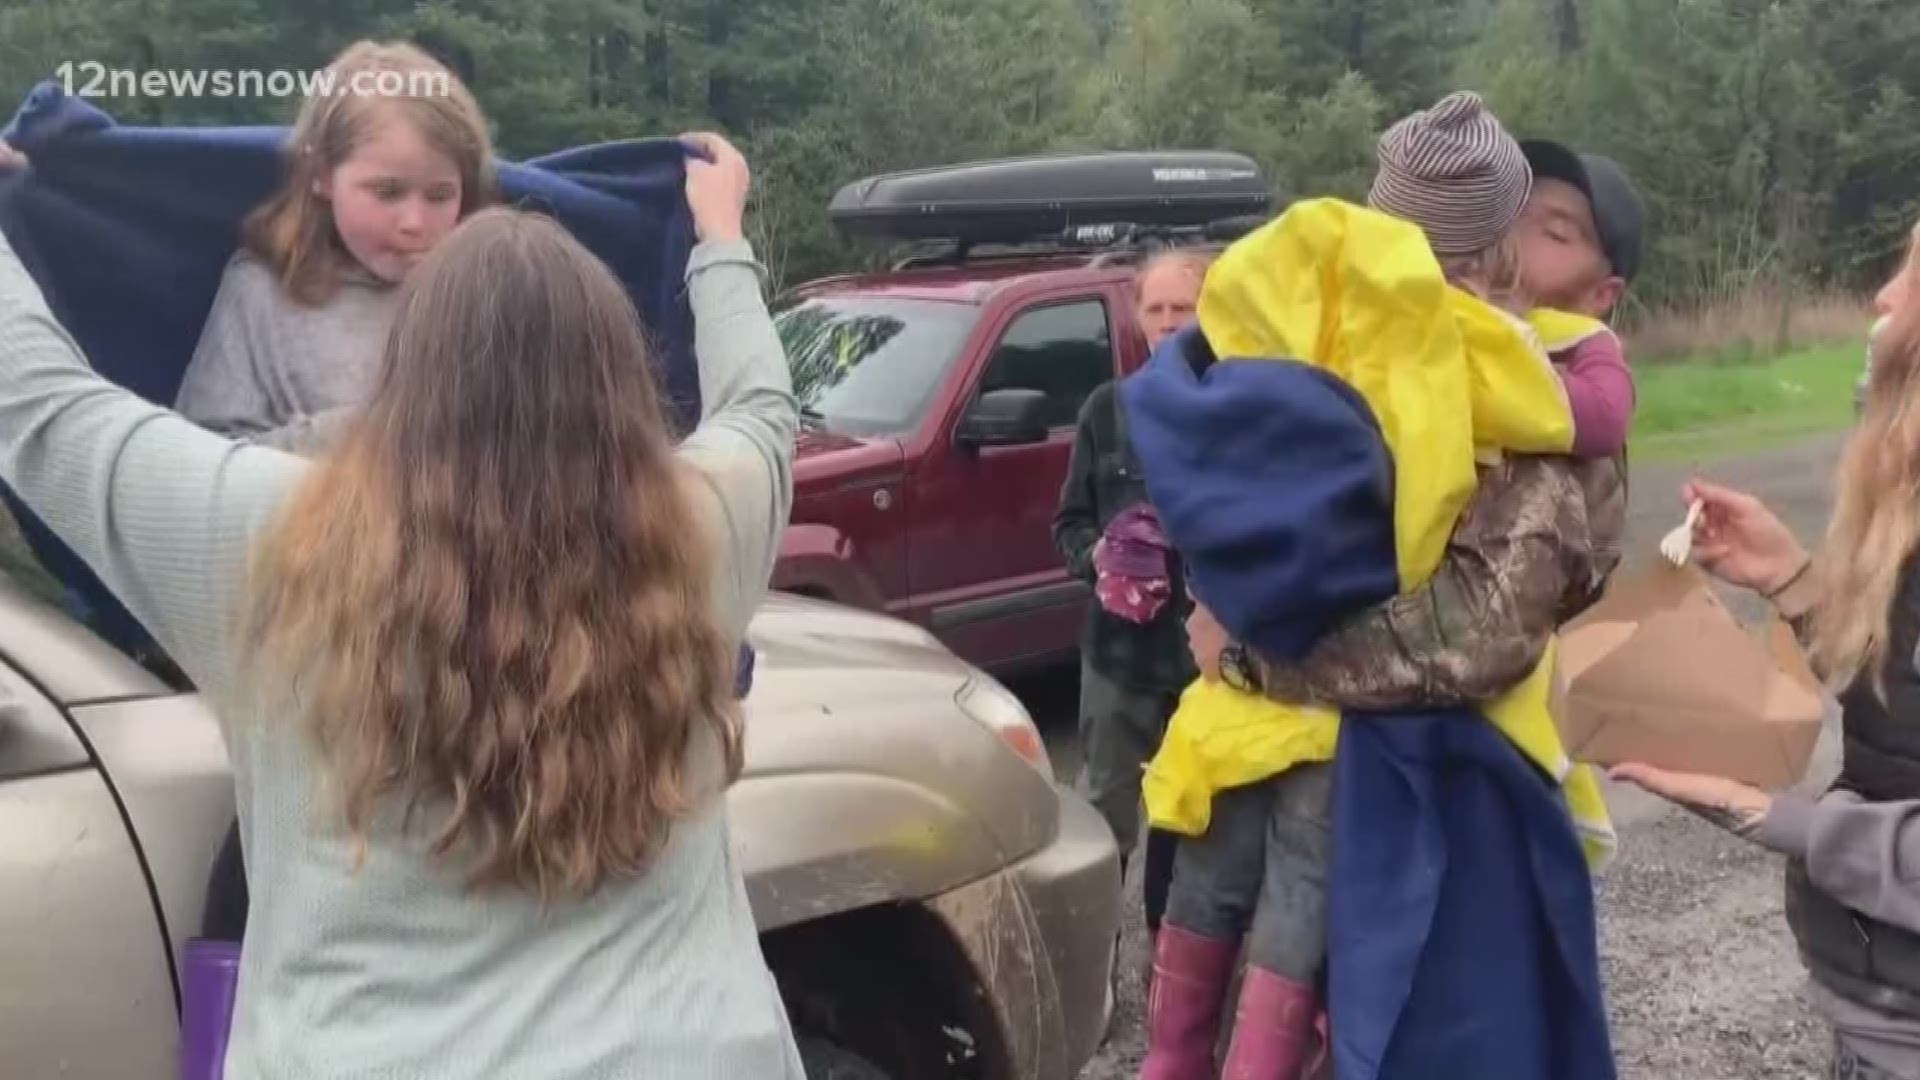 The two sisters, one five and the other eight years old, were found alive after being lost for two days in the California wilderness. Rescue effort included a dozen agencies, the national guard among them, helicopters, and tracking dogs.